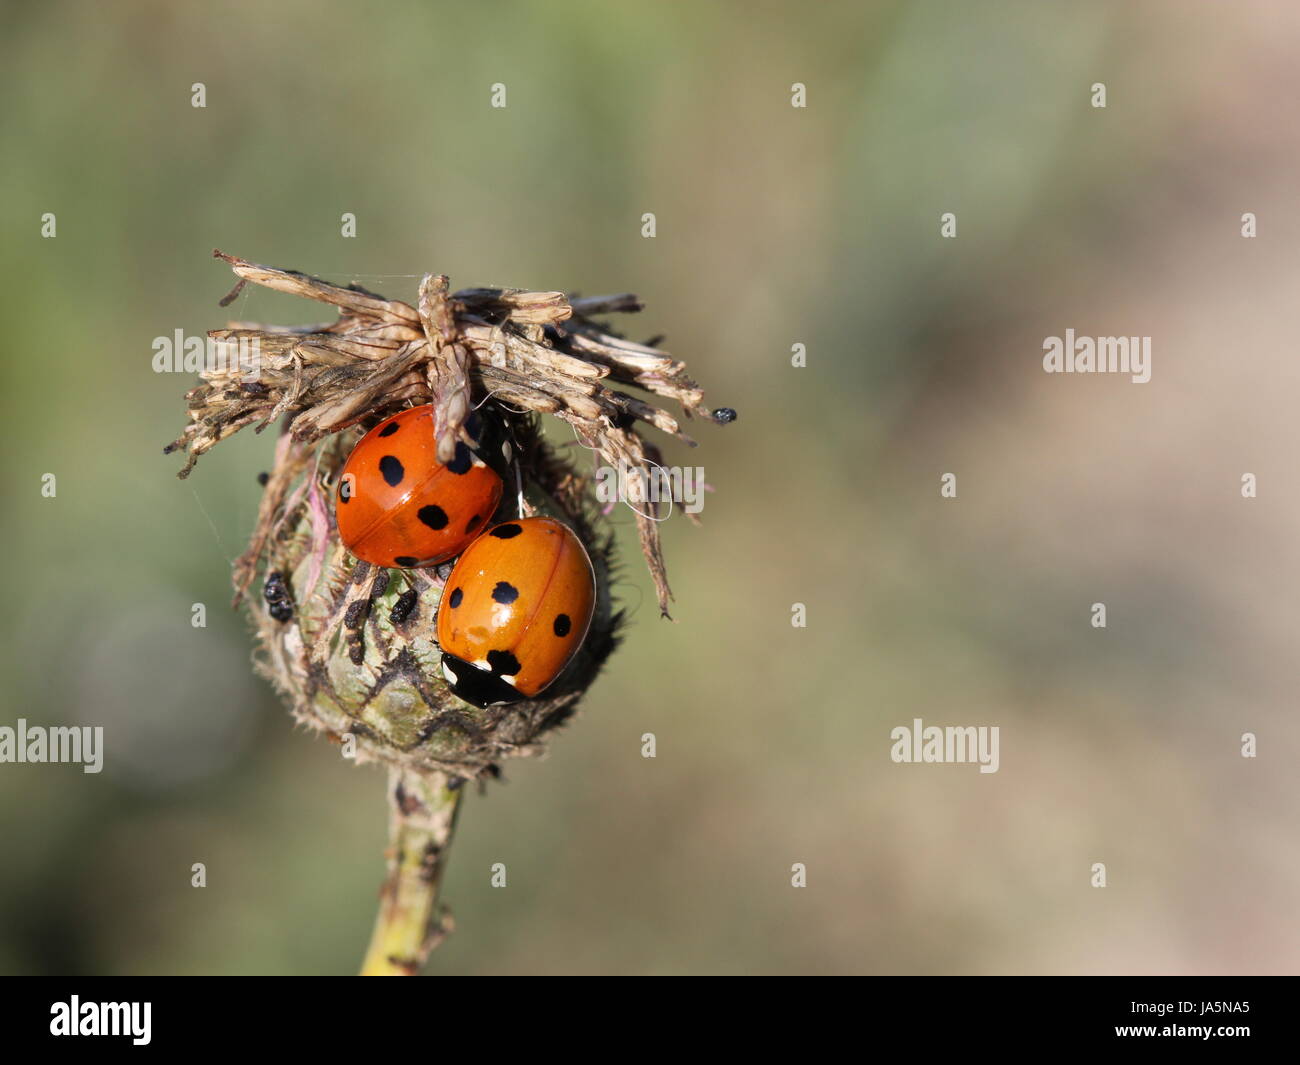 two ladybugs on withered greater knapweed Stock Photo